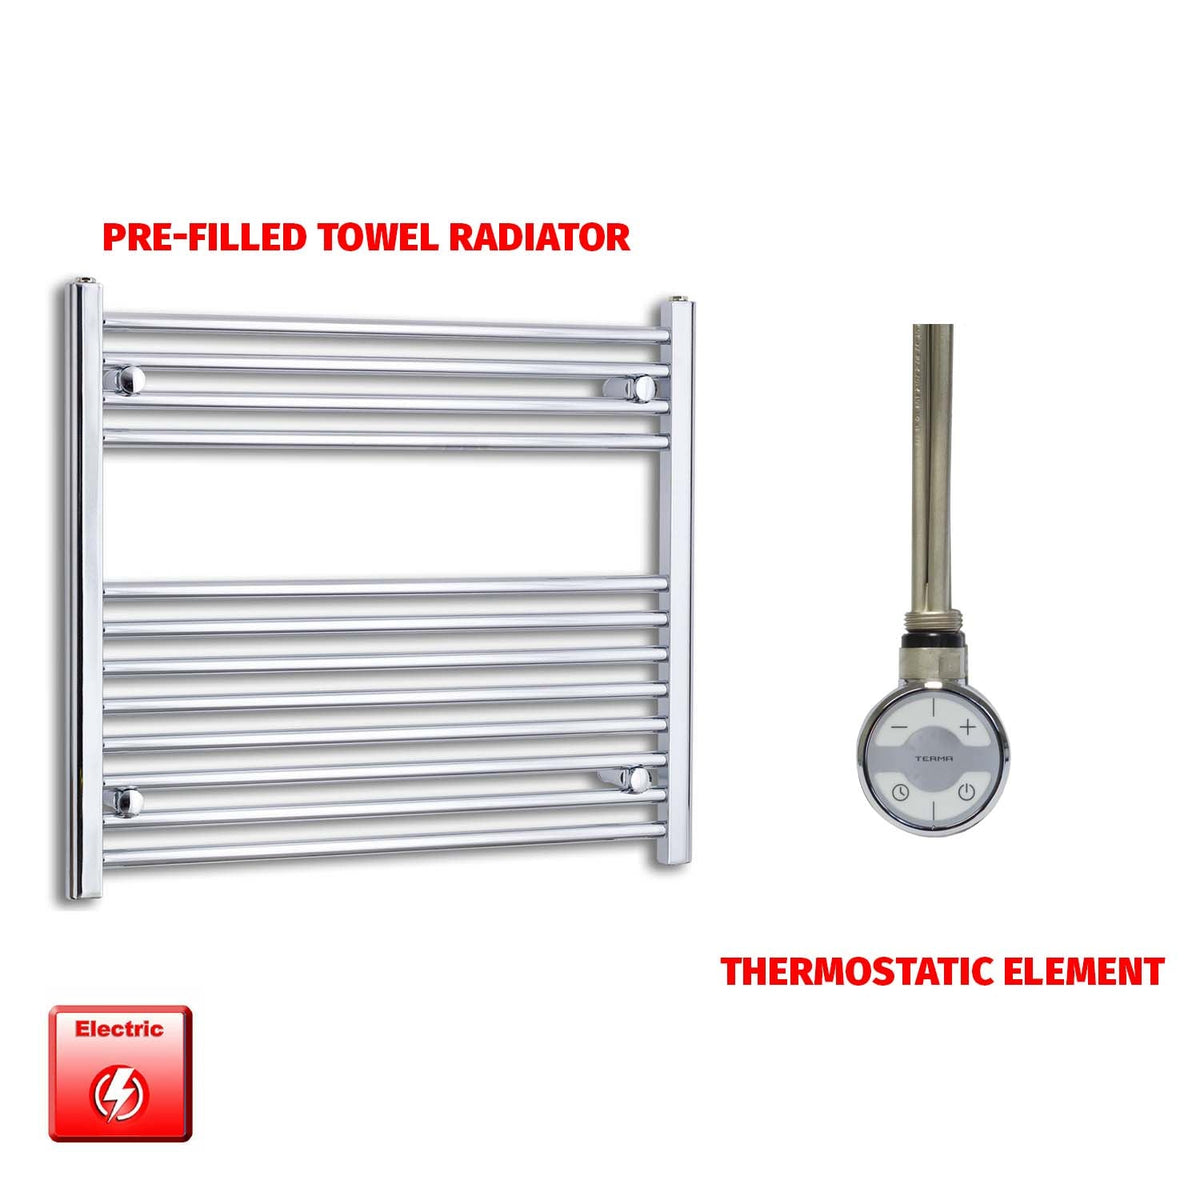 700 x 800 Pre-Filled Electric Heated Towel Radiator Straight Chrome MOA Thermostatic element no timer